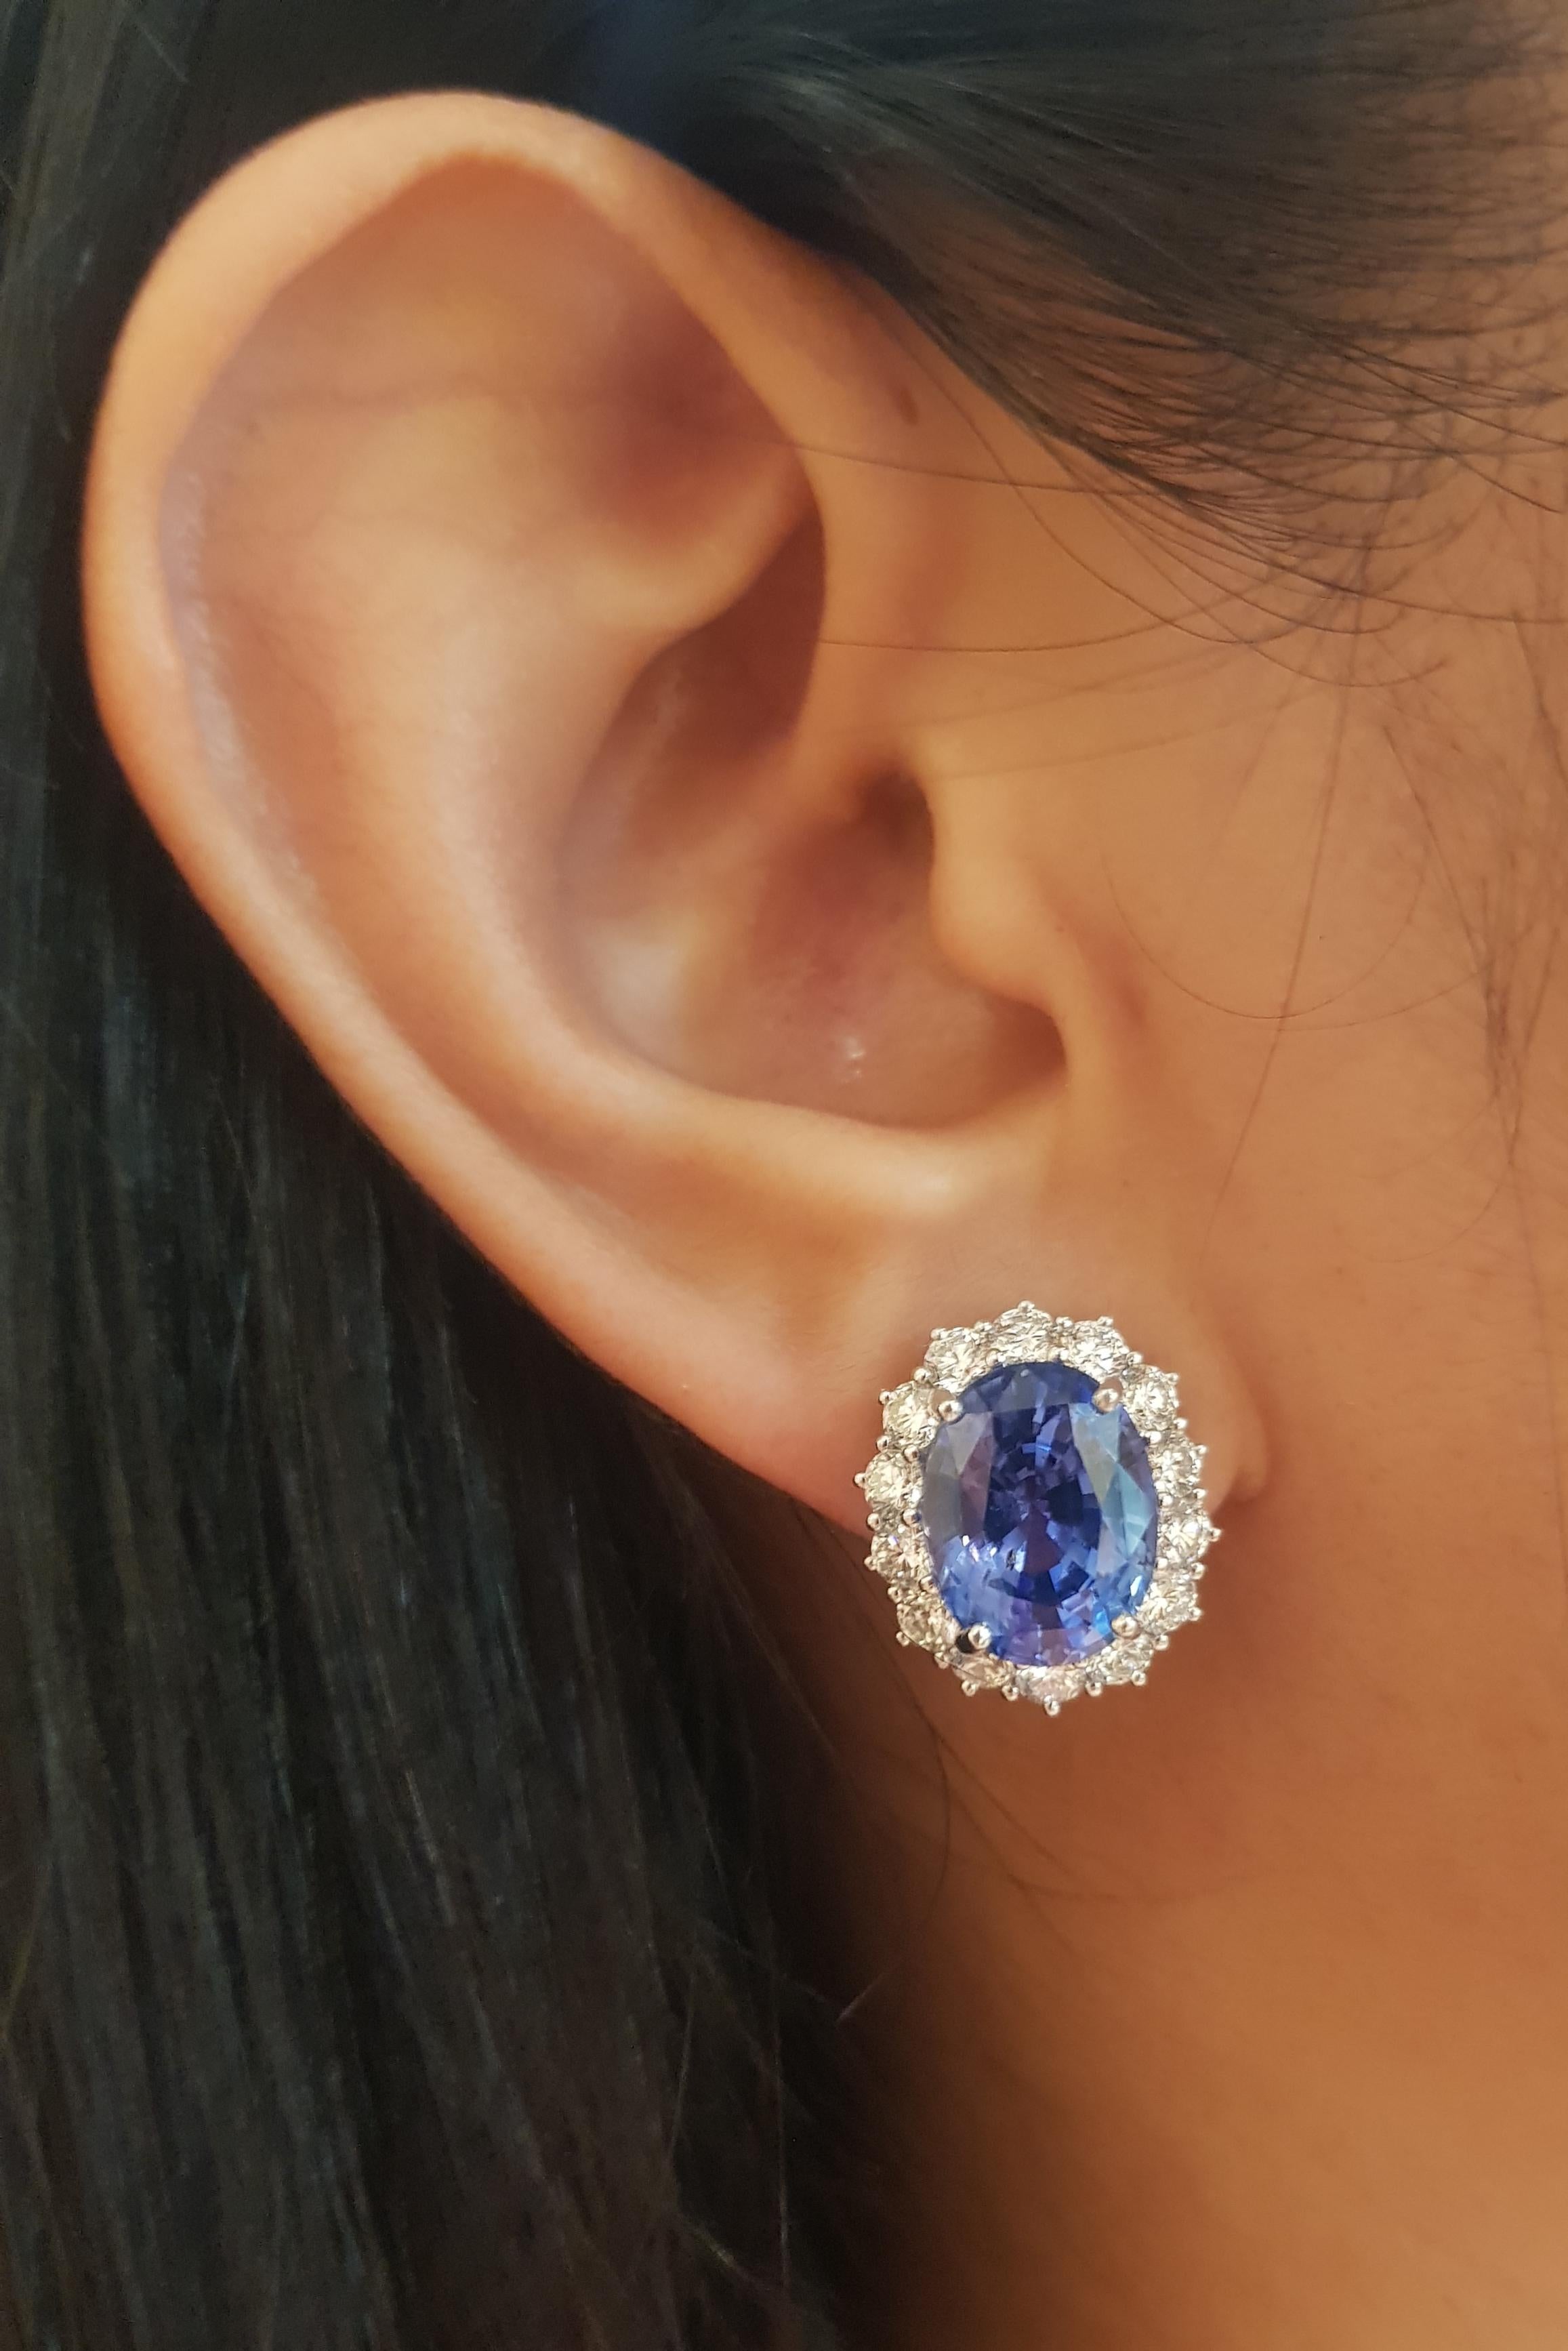 Blue Sapphire 12.56 carats with Diamond 2.60 carats Earrings set in 18K White Gold Settings

Width: 1.4 cm 
Length: 1.7 cm
Total Weight: 11.92 grams

